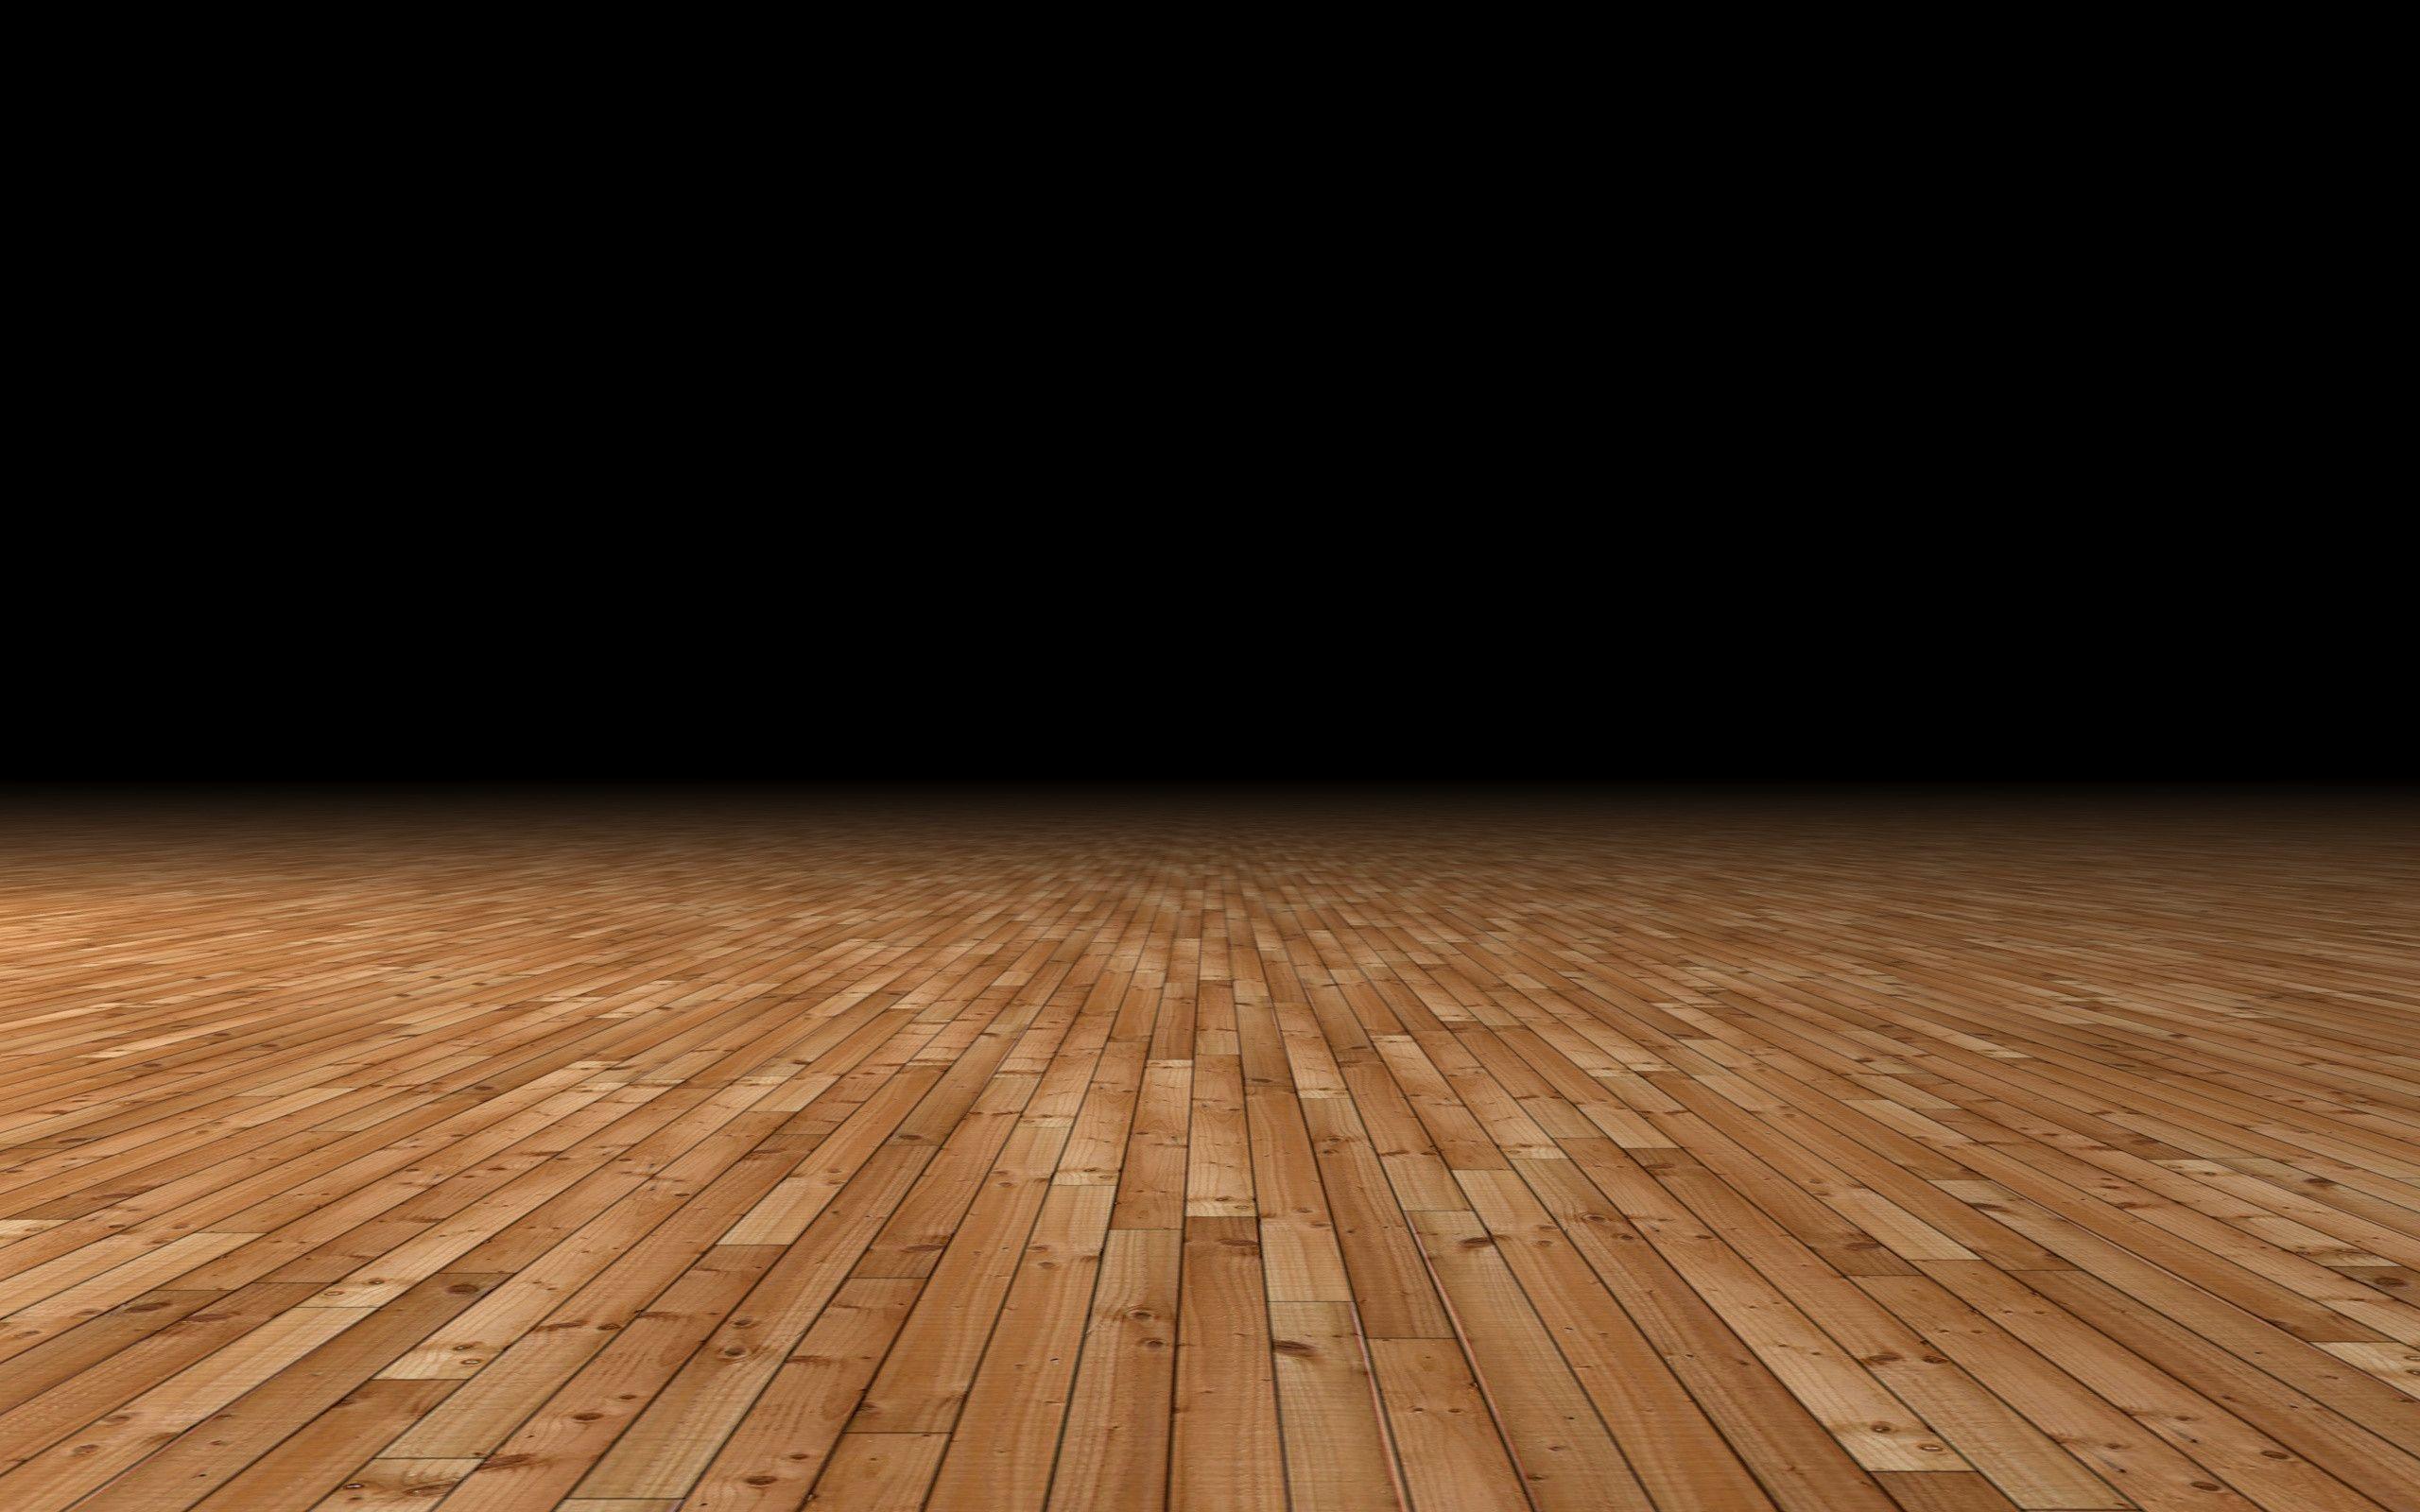 Basketball Court Wallpaper For Smartphone, HQ Background. HD